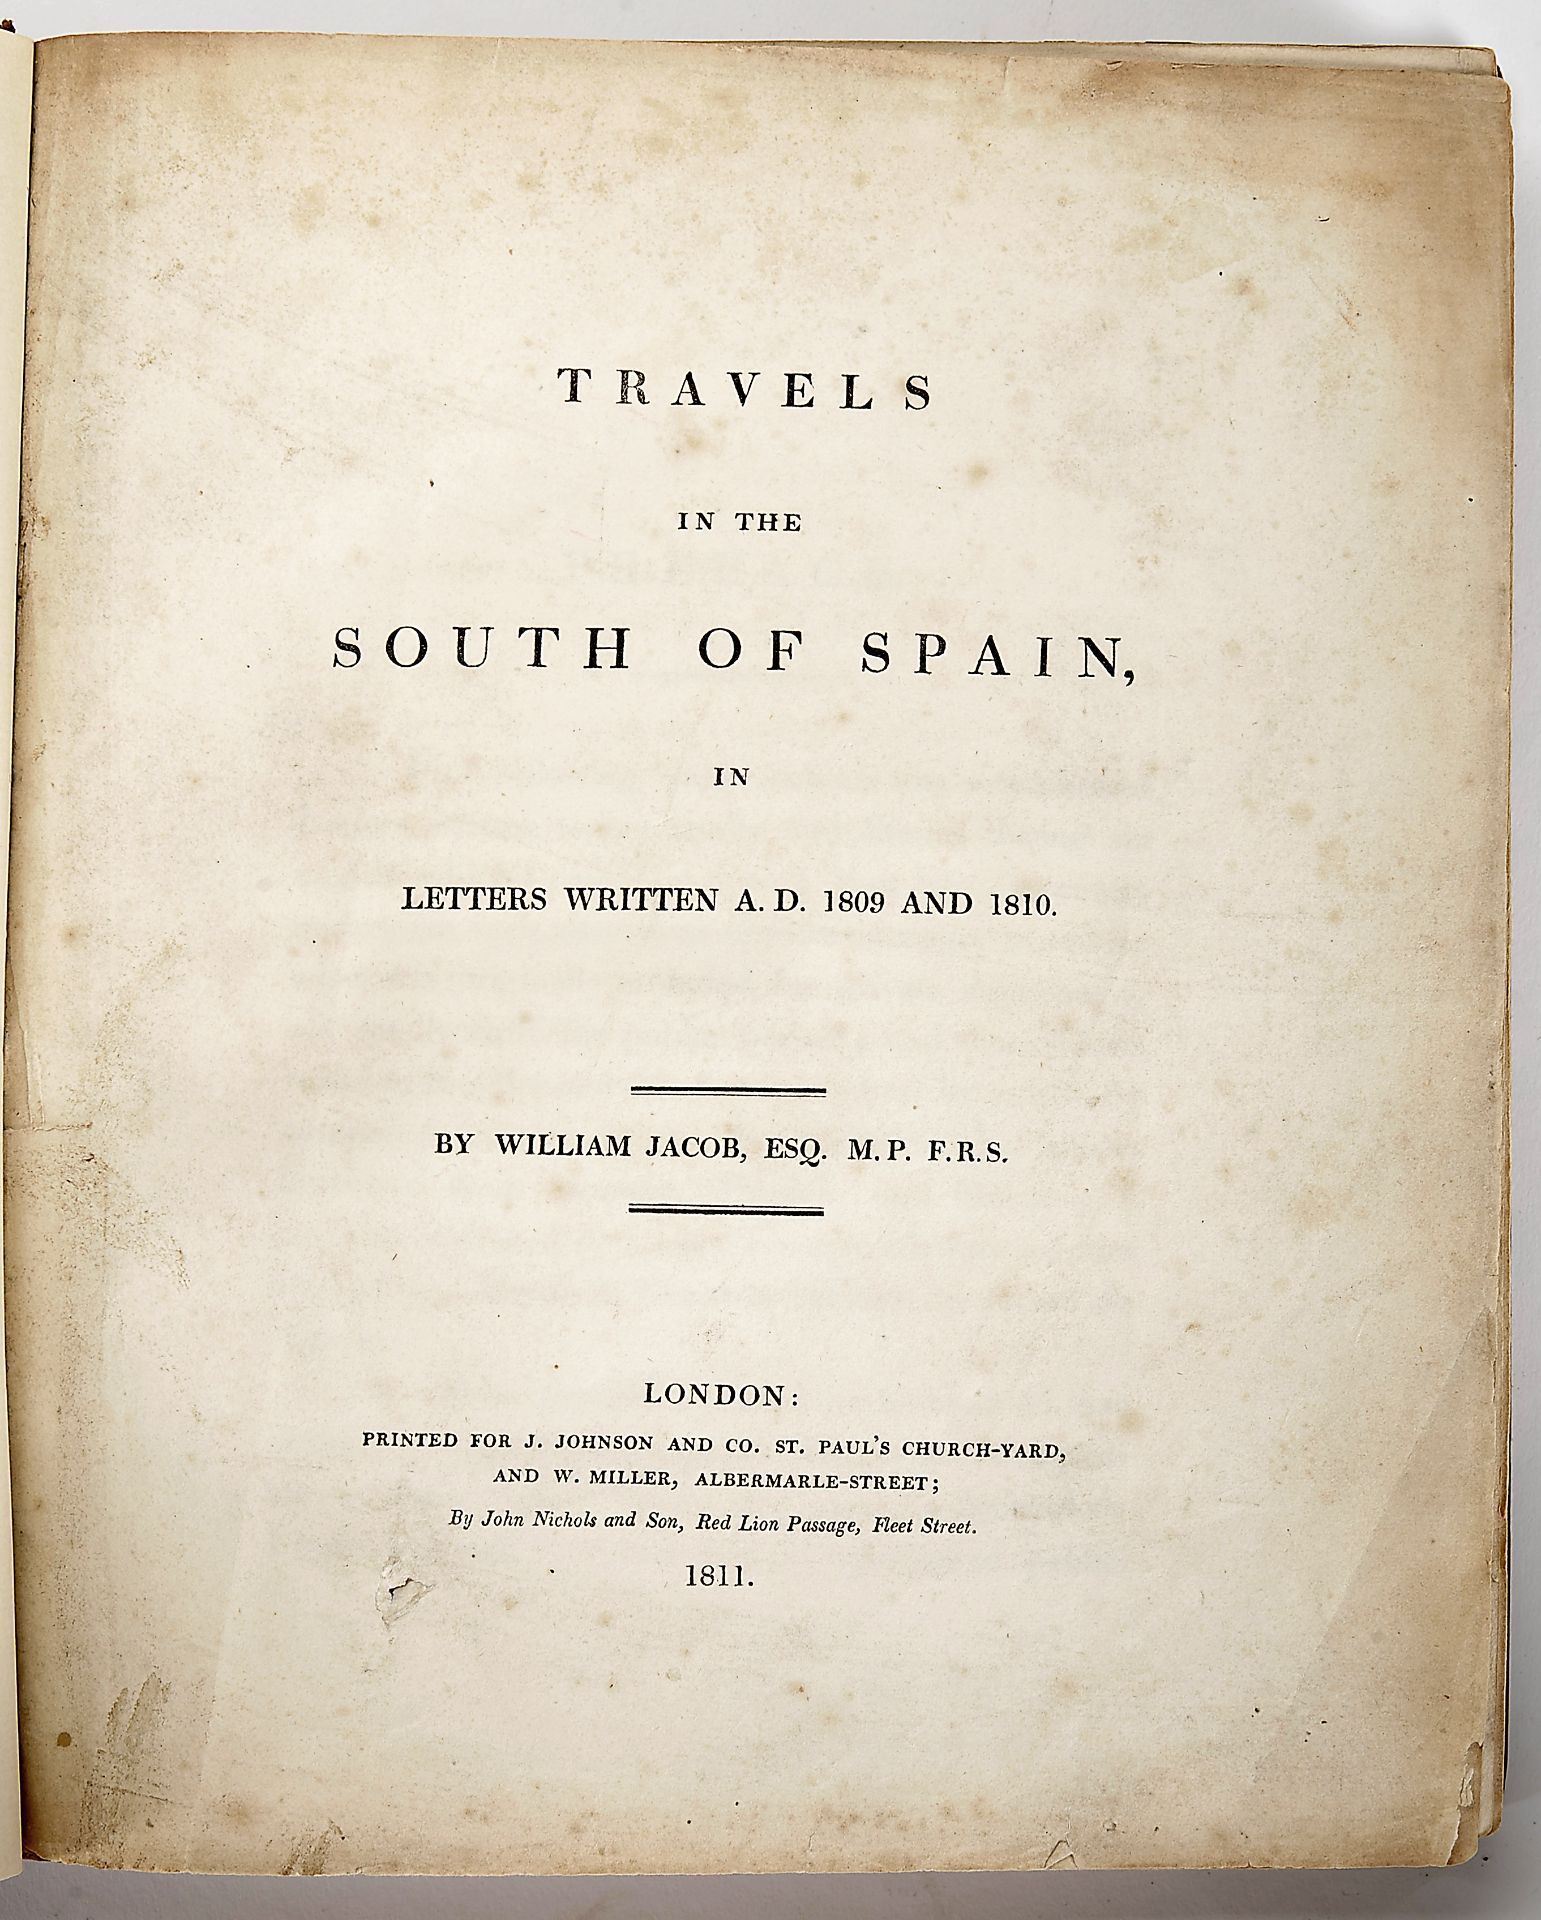 JACOB, William.- Travels in the South of Spain, in letters written A. D. 1809 and 1810.- London: pri